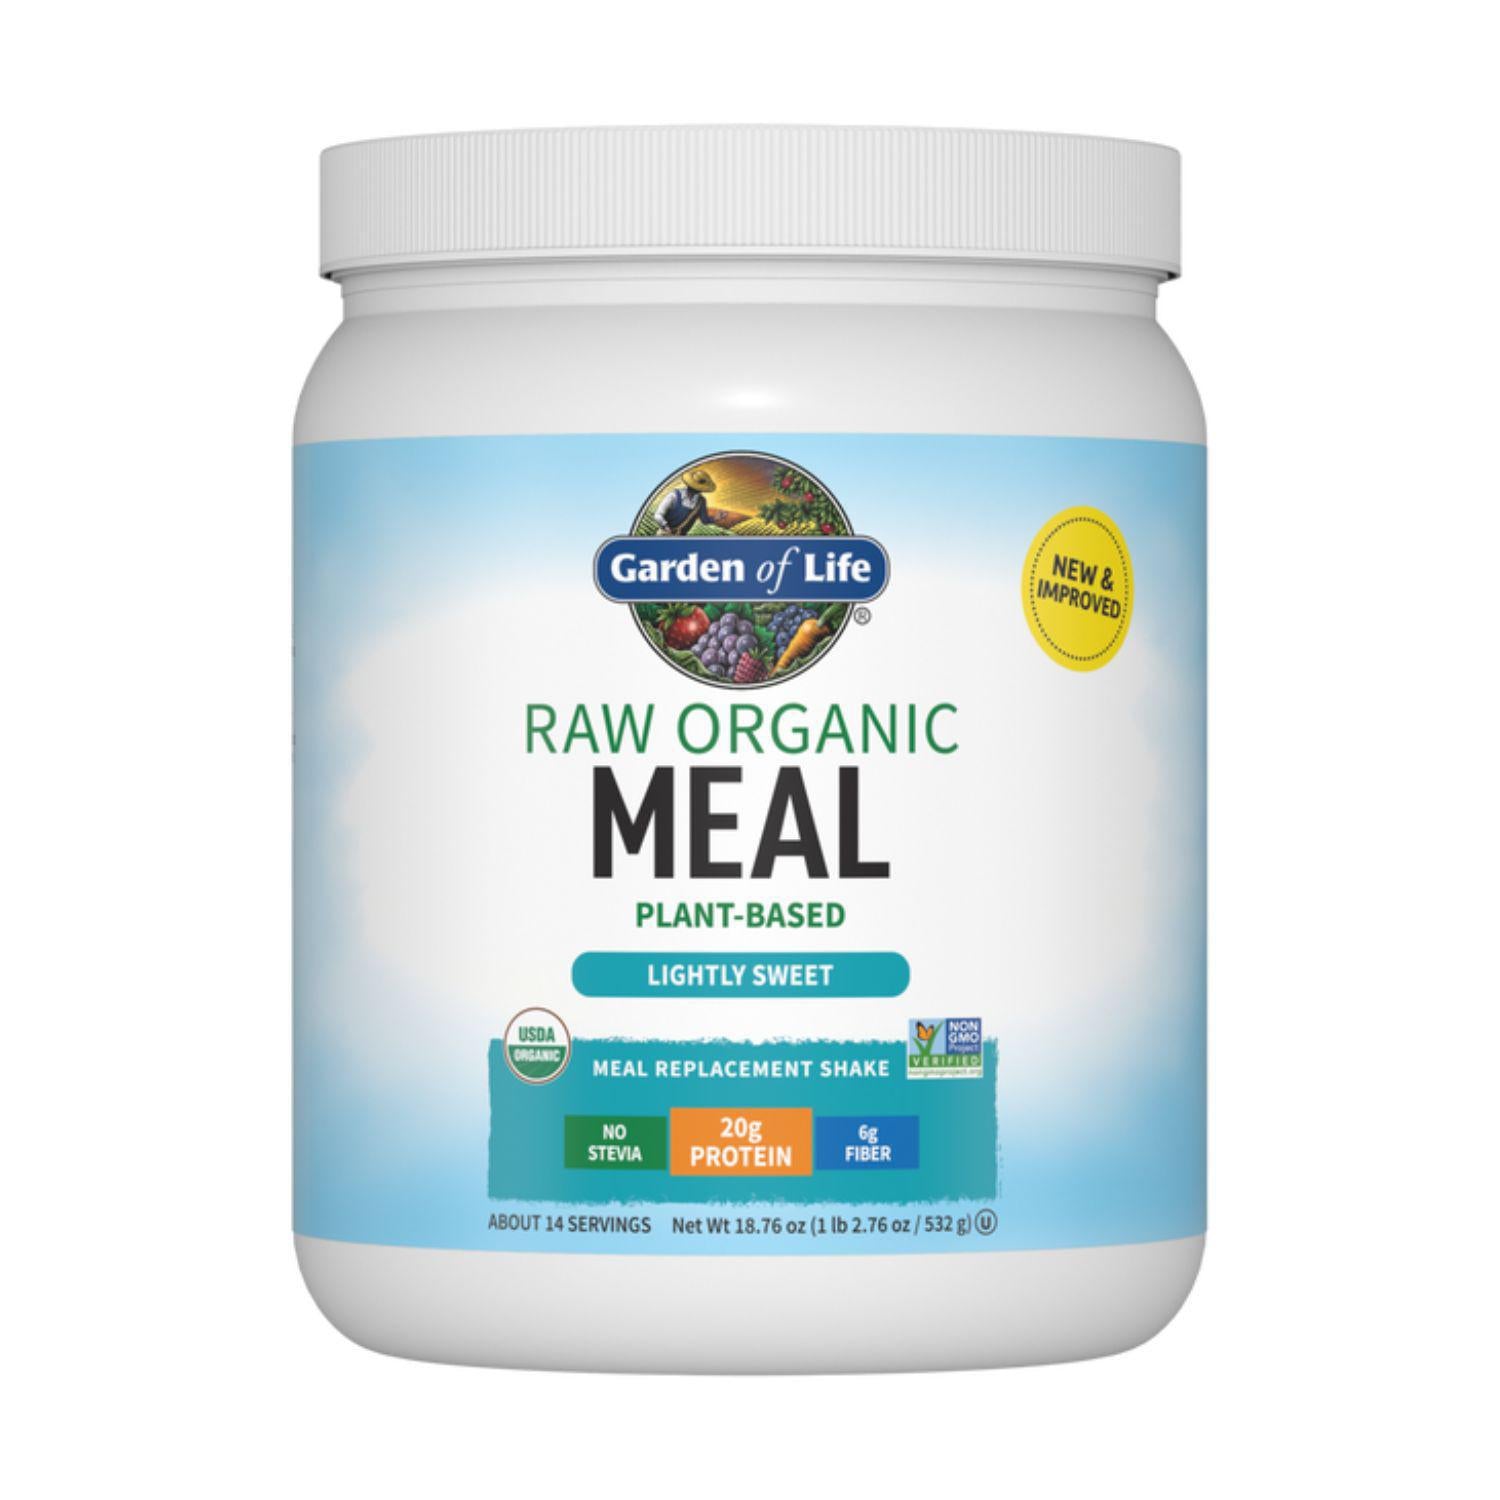 Raw Meal Replacement Lightly Sweet No Stevia - 18.76 oz